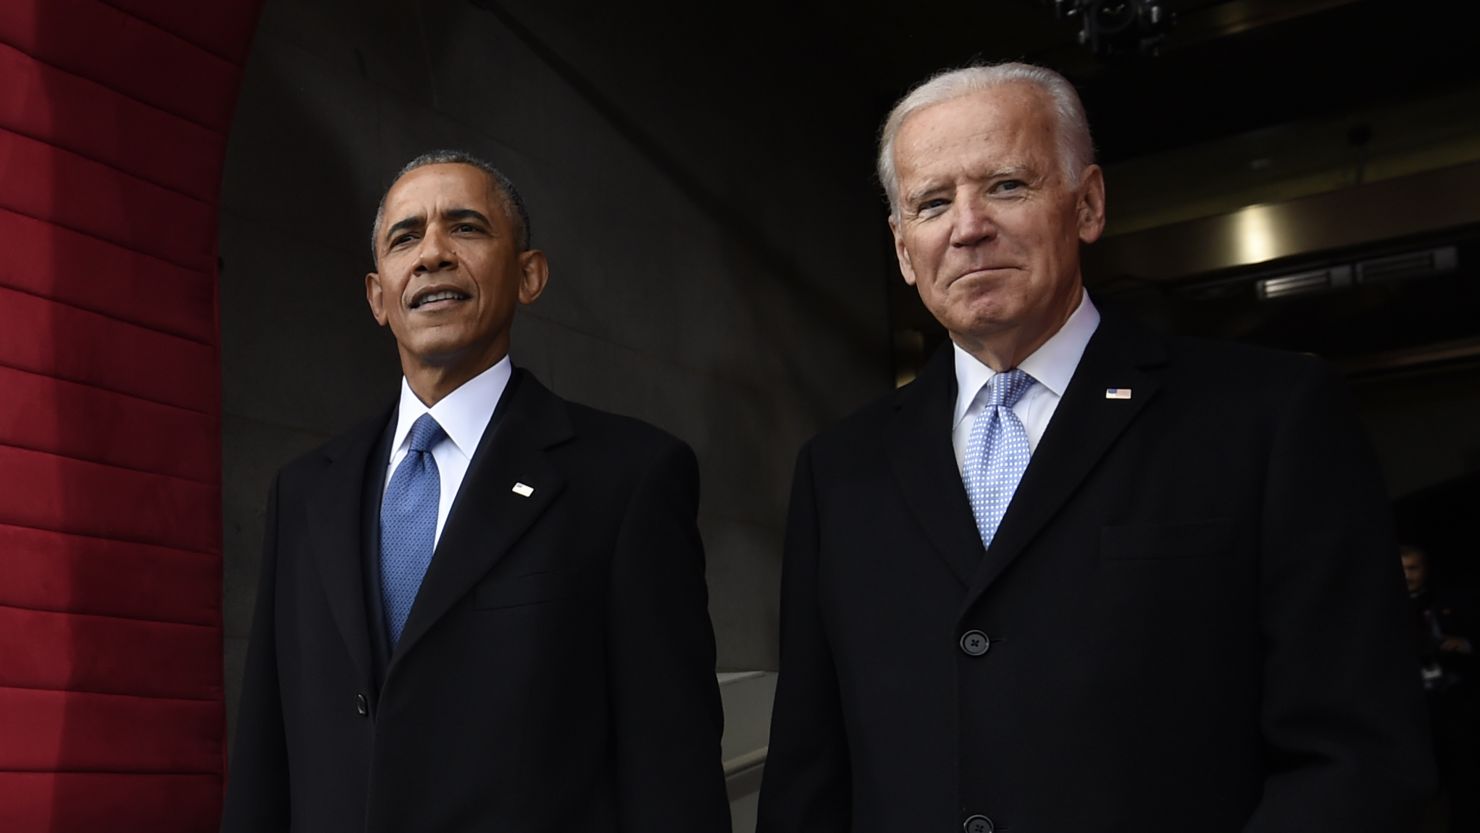 Then-President Barack Obama and then-Vice President Joe Biden arrive for the presidential inauguration of Donald Trump at the US Capitol on January 20, 2017, in Washington, DC.